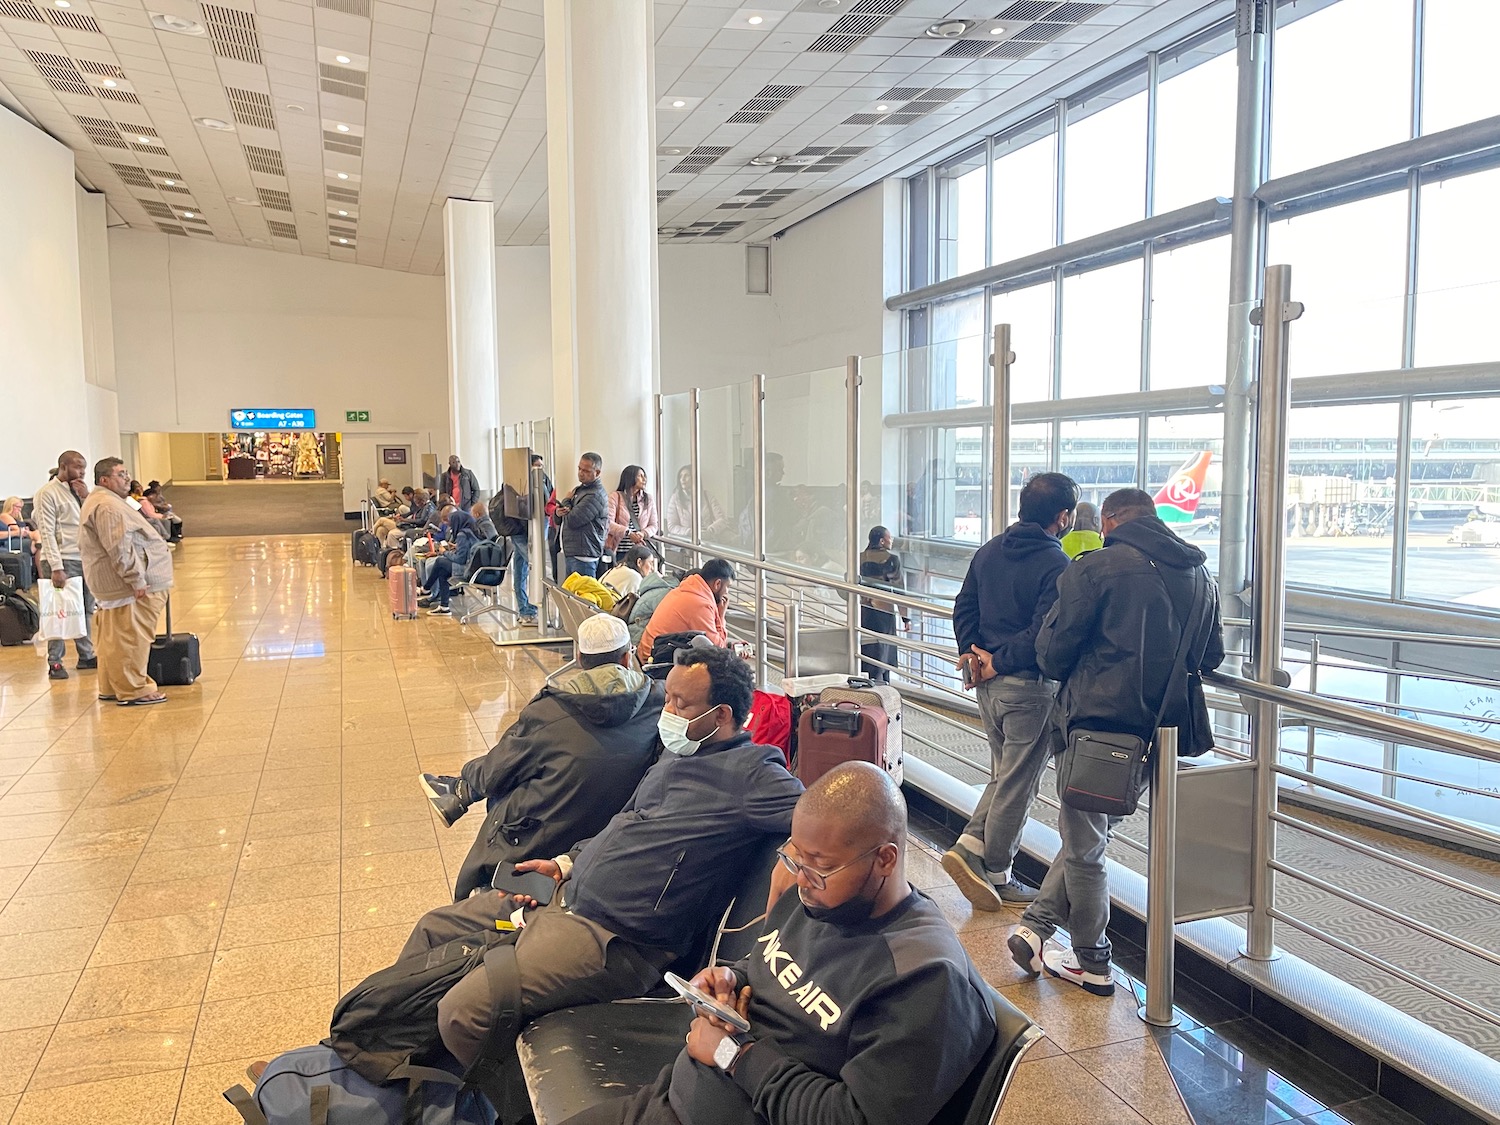 people sitting in a waiting area